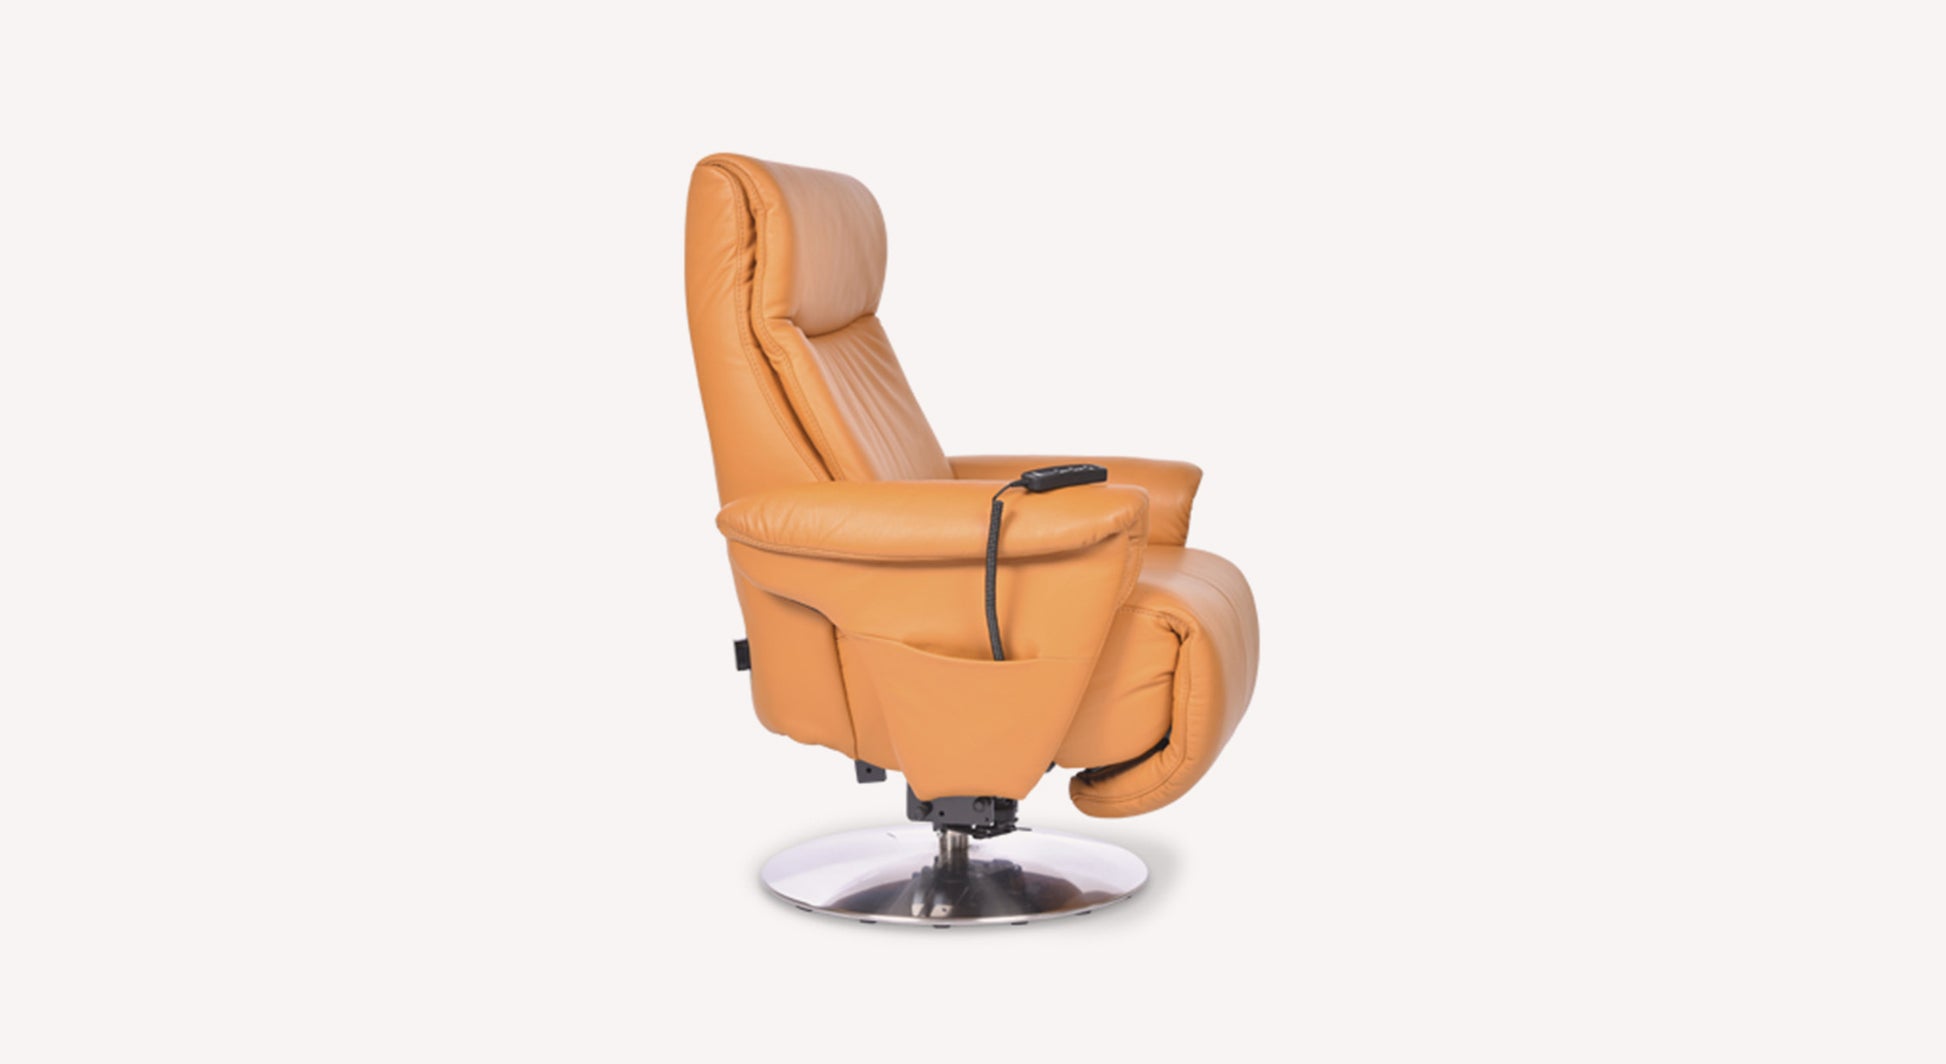 Fauteuil Relax 7532 Easywing +50 tissus & cuirs au choix